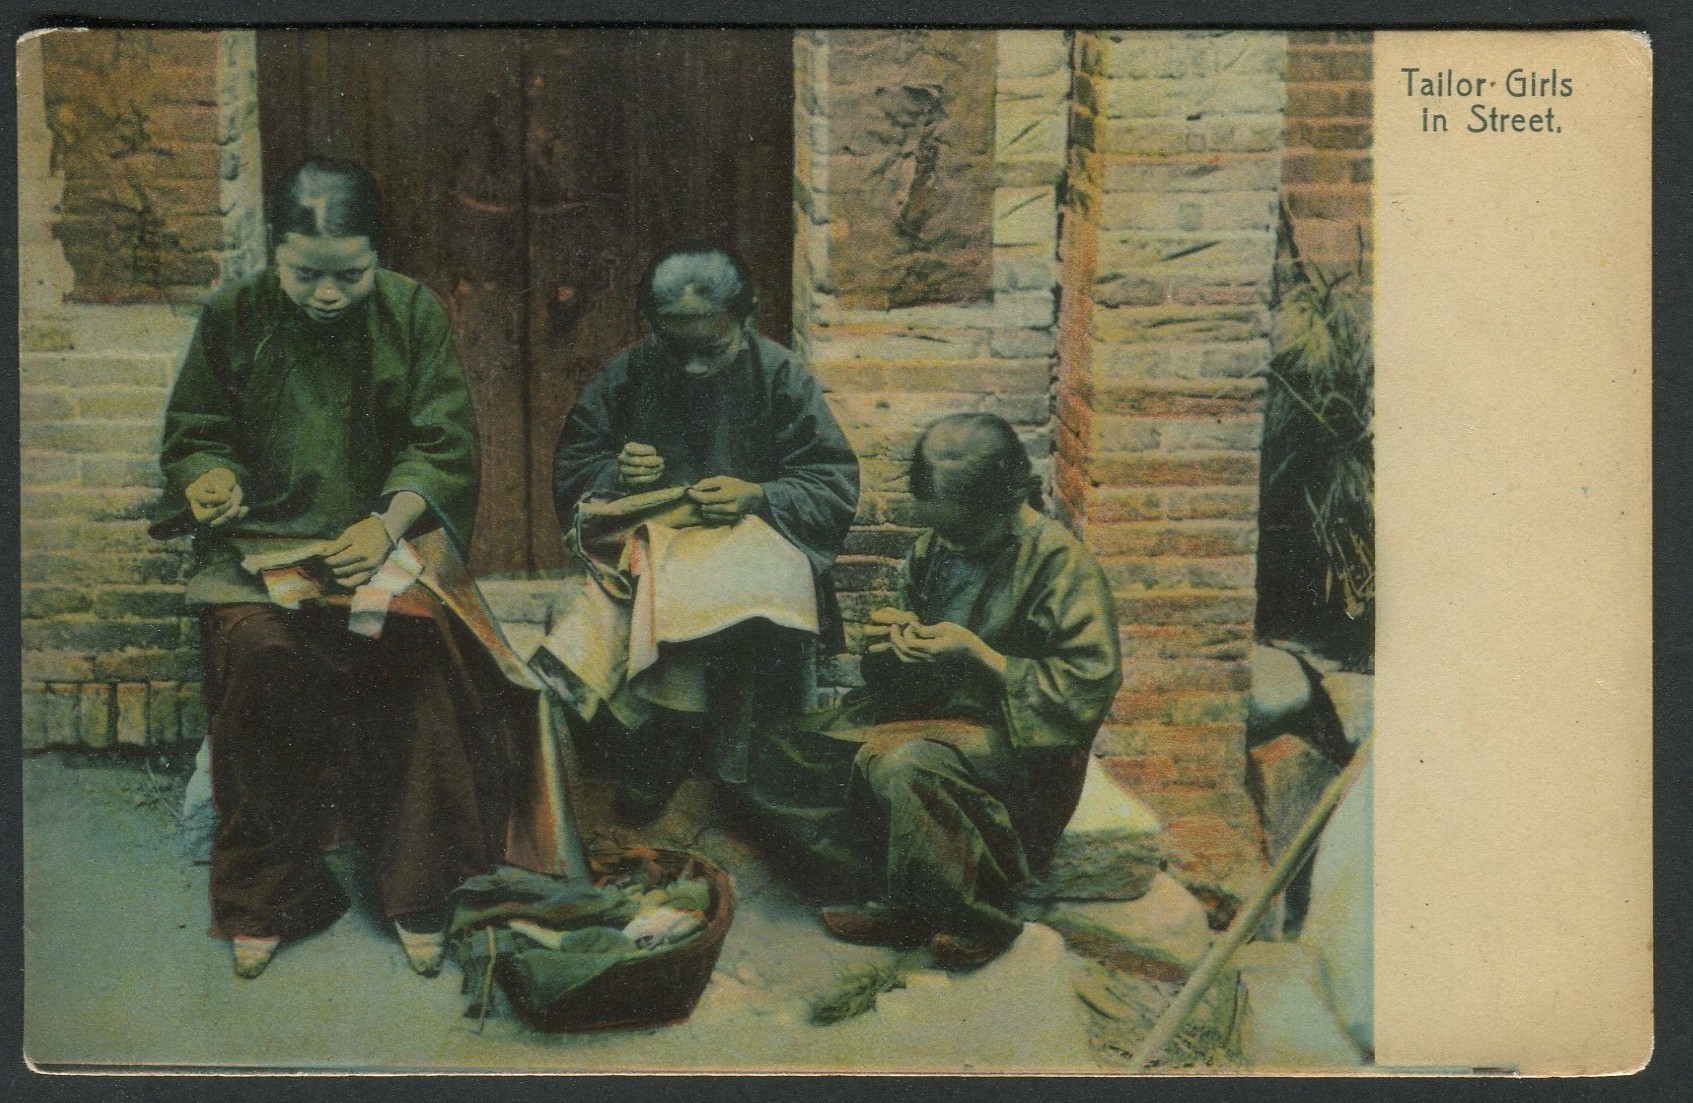 ANTIQUE CHINESE POSTCARD - TAILOR GIRLS IN STREET